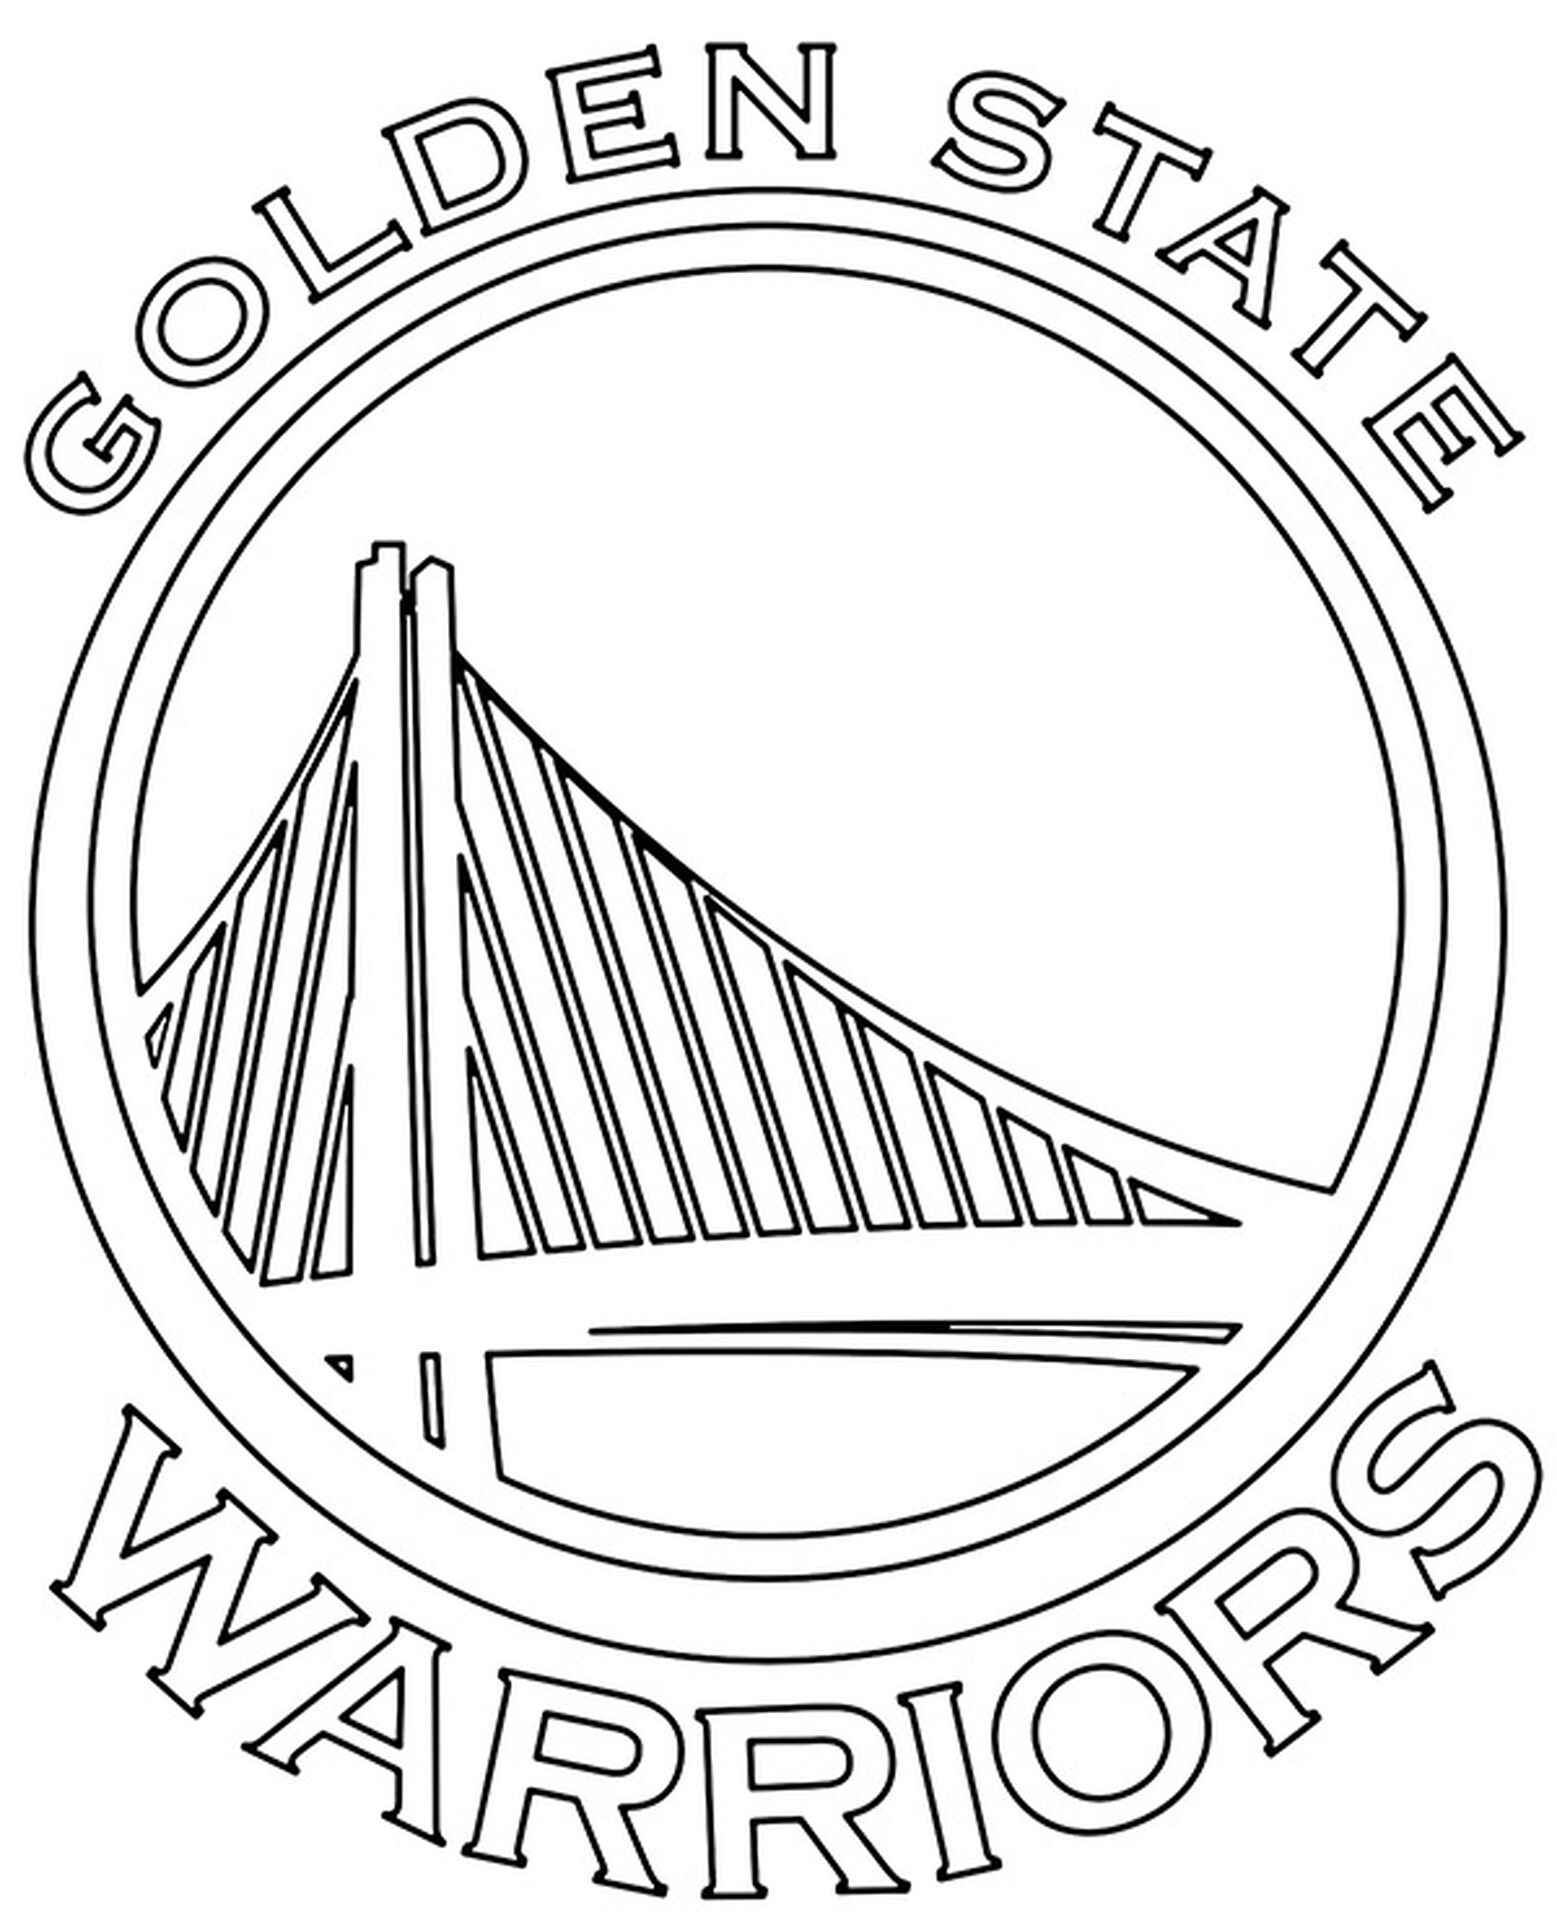 golden state warriors logo coloring page